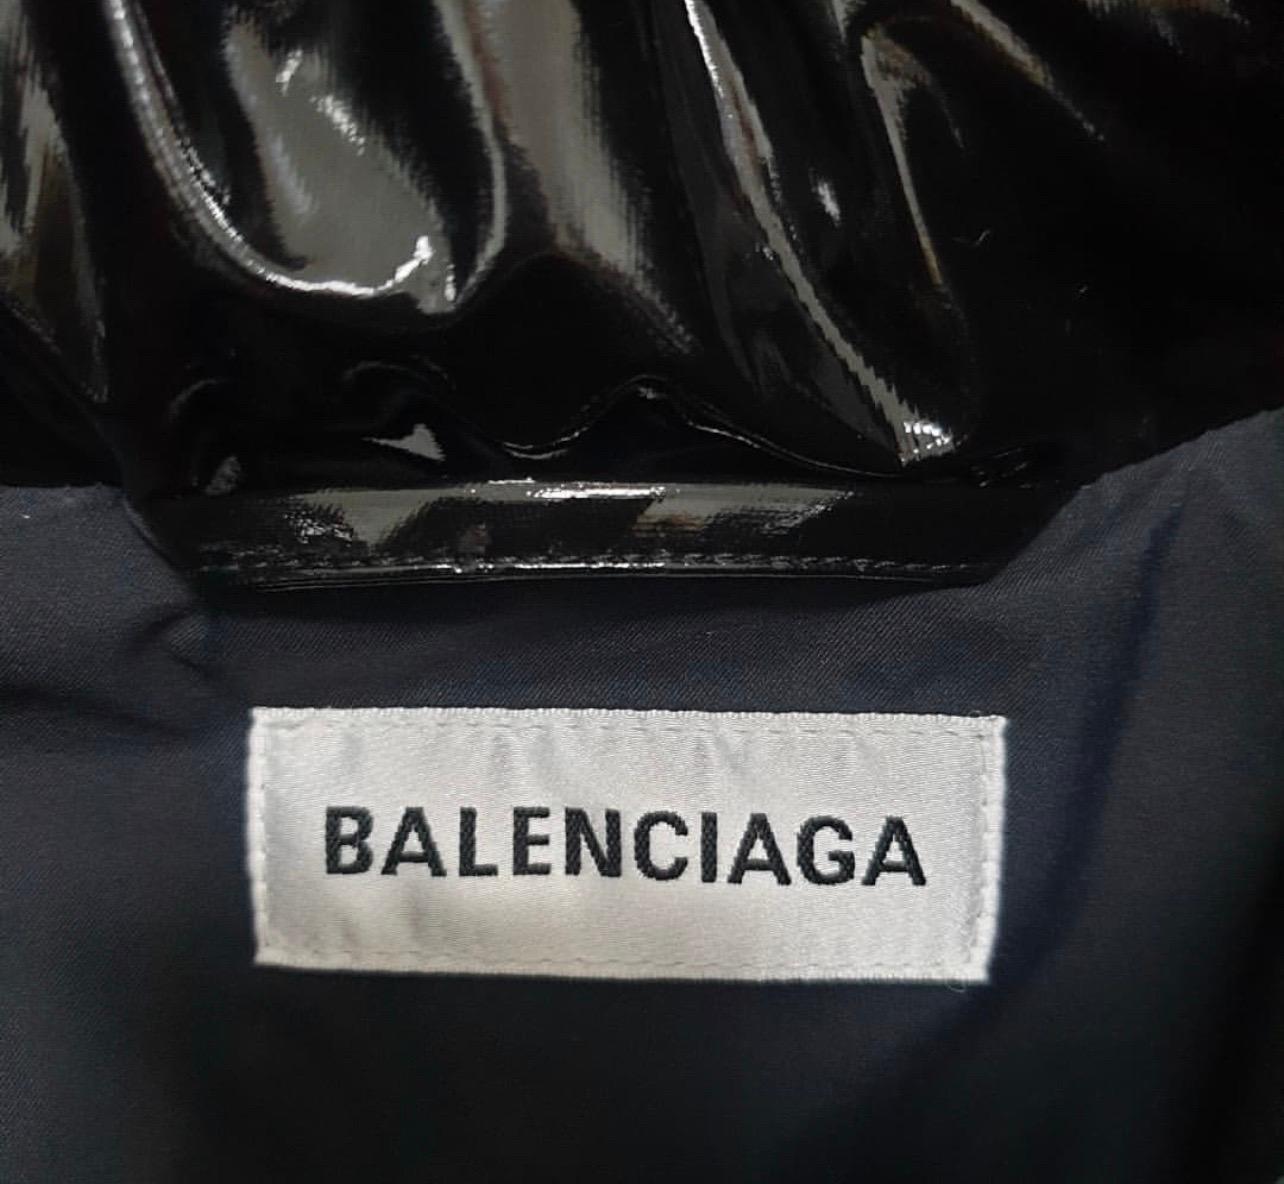 Balenciaga's  coat for Pre-Fall makes a worthy investment piece especially since puffers never really go out of style. 
This iteration is designed from glossy vinyl with a cropped hem and stand collar to keep you protected from treacherous gusts of